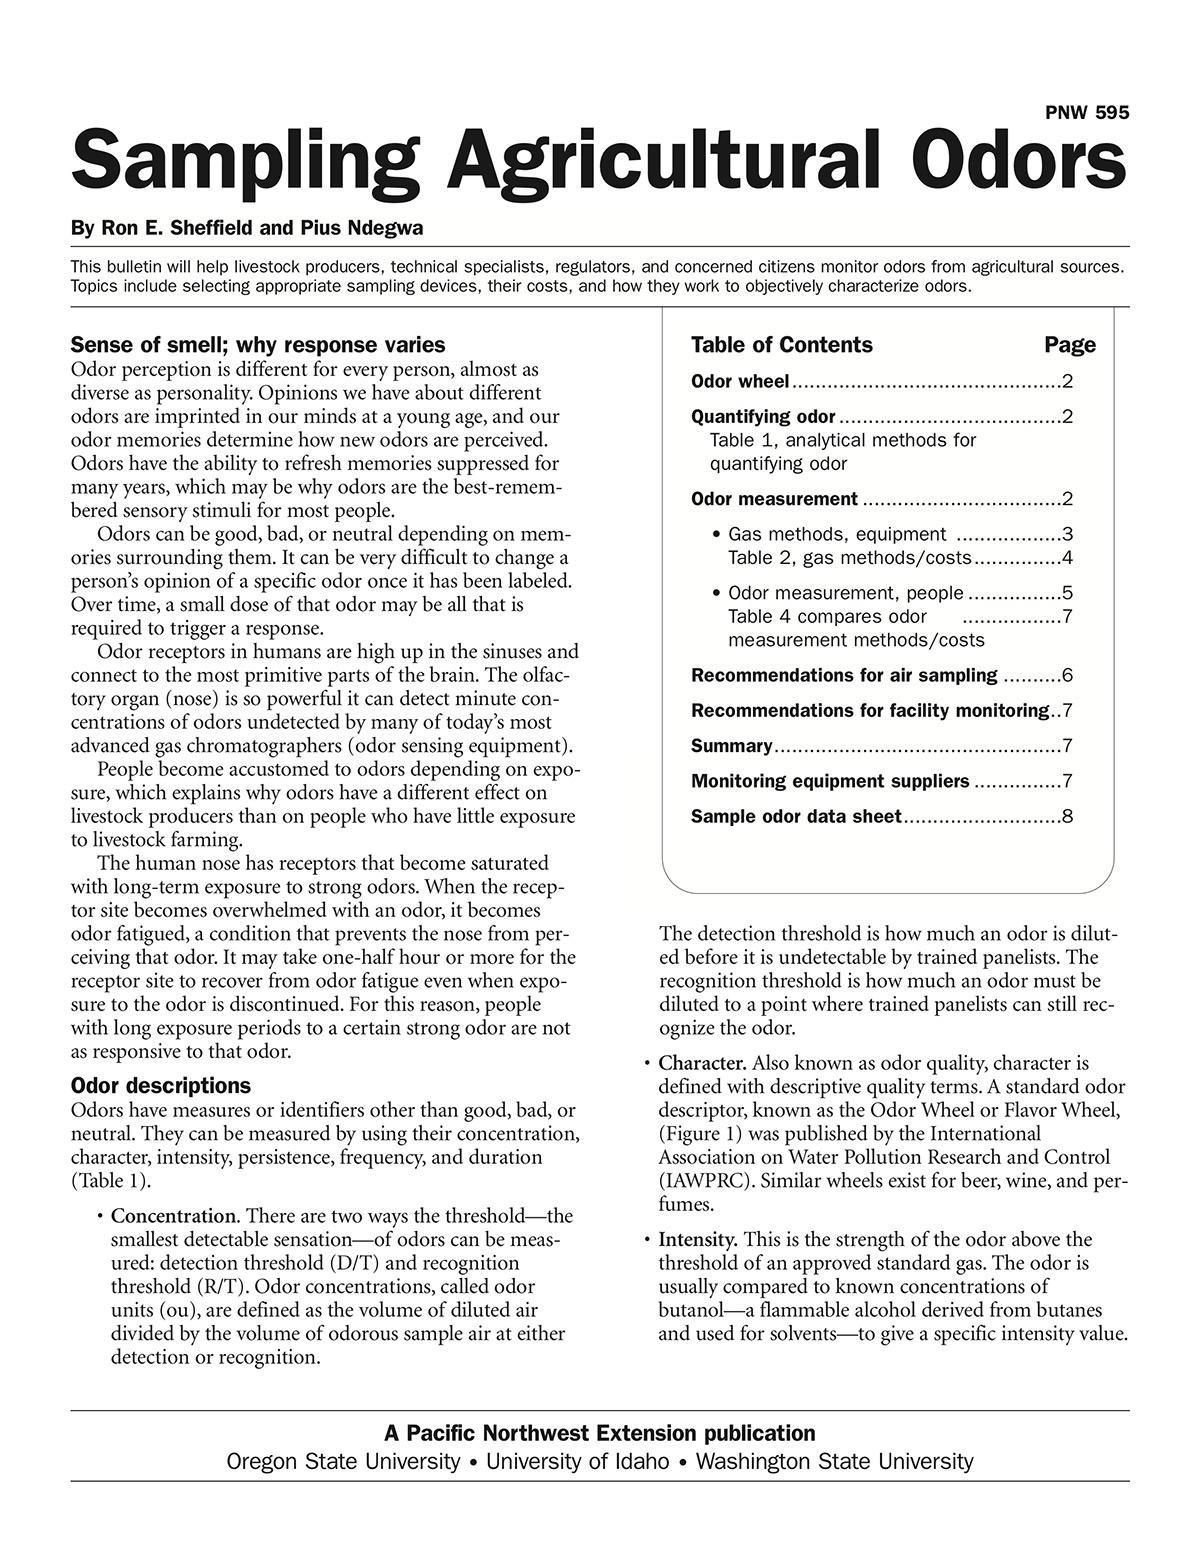 Cover image of Sampling Agricultural Odors publication